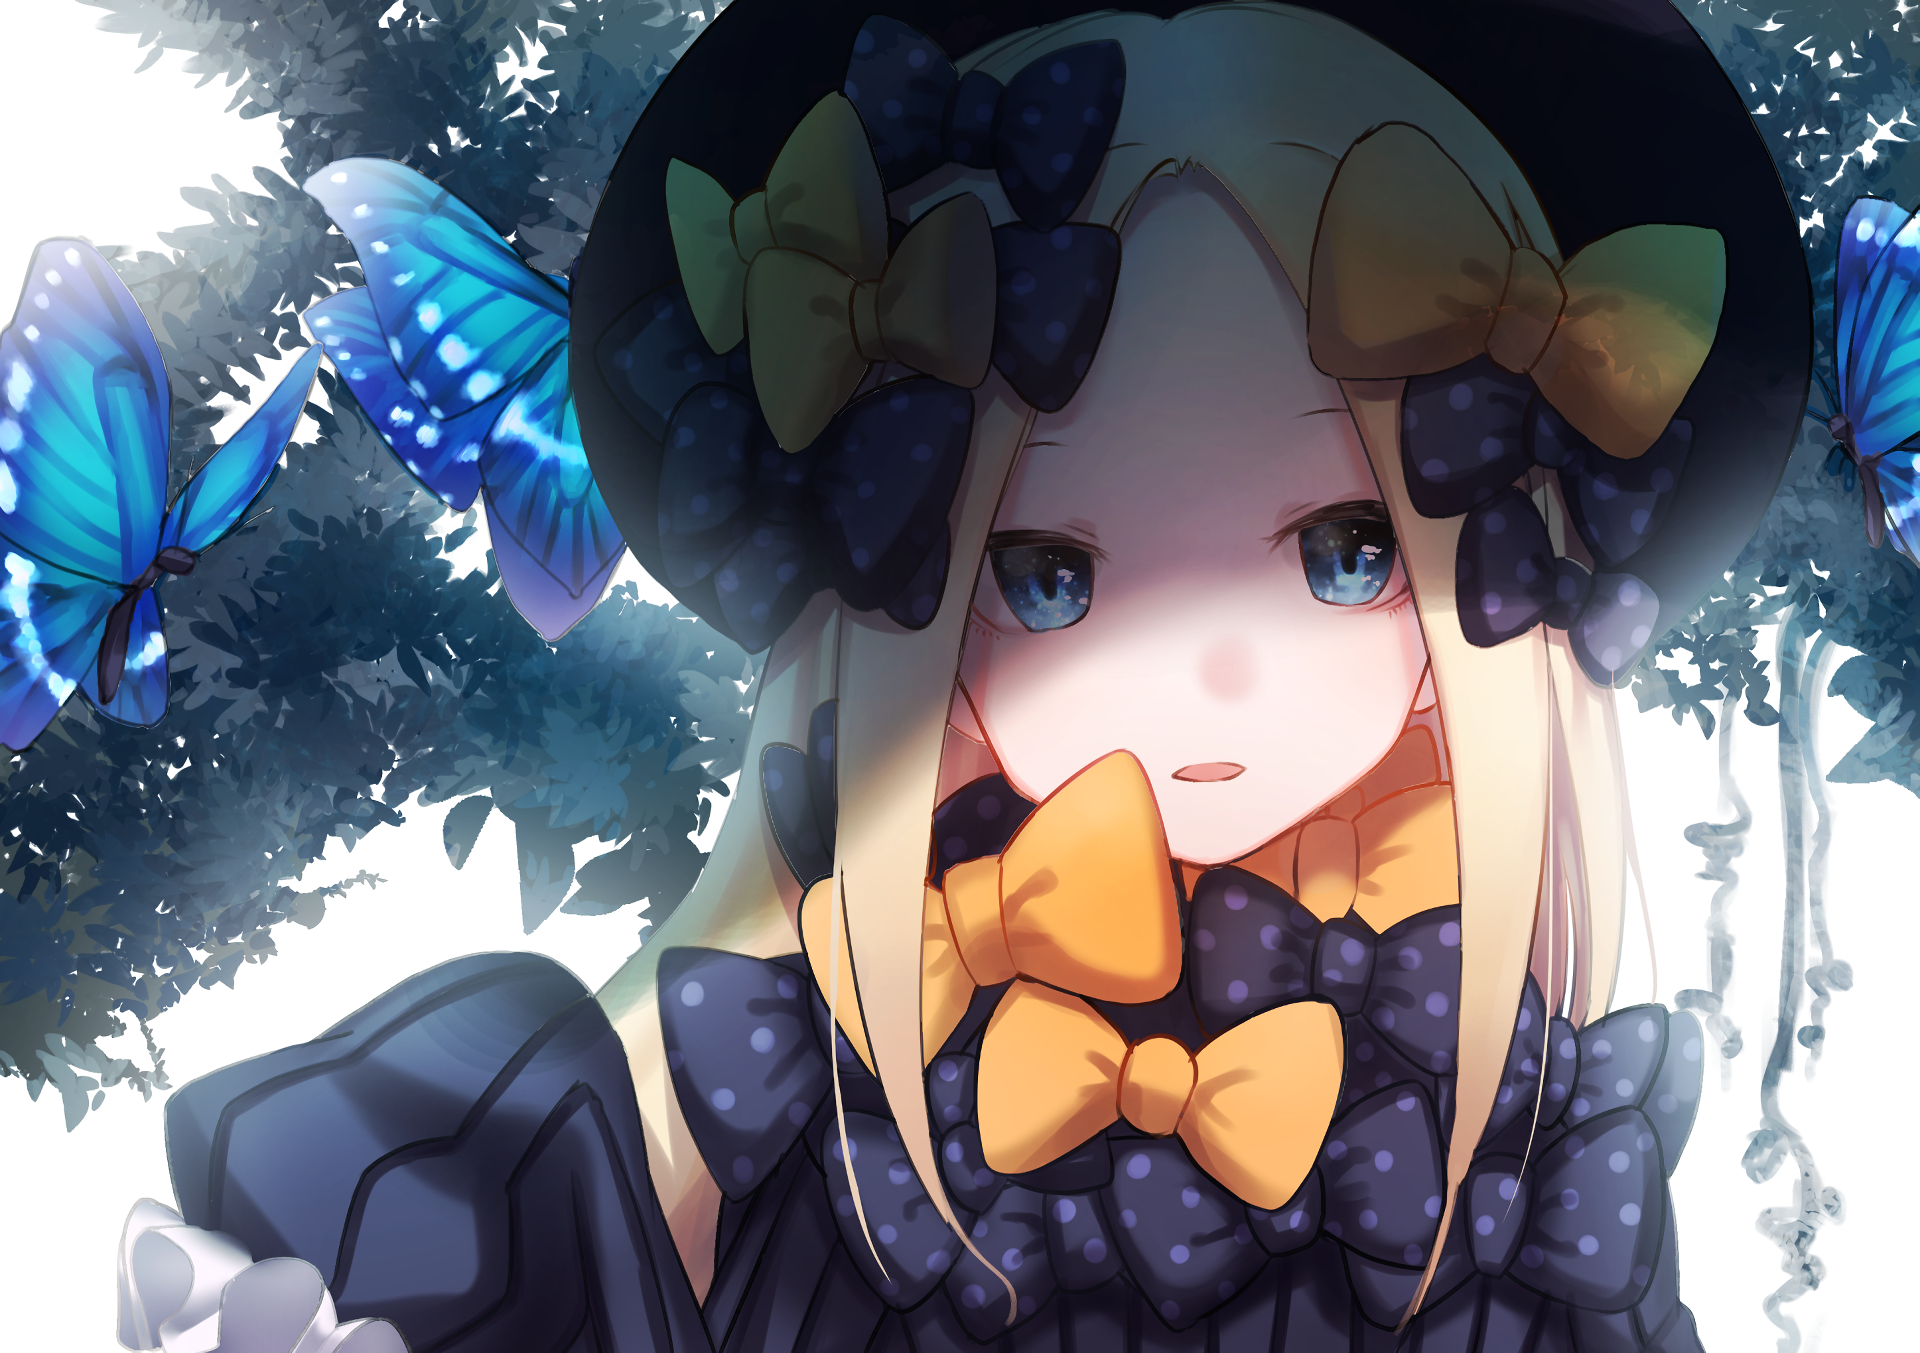 Fate Grand Order Abigail Williams Fate Grand Order Anime Anime Girls Butterfly 1920x1353